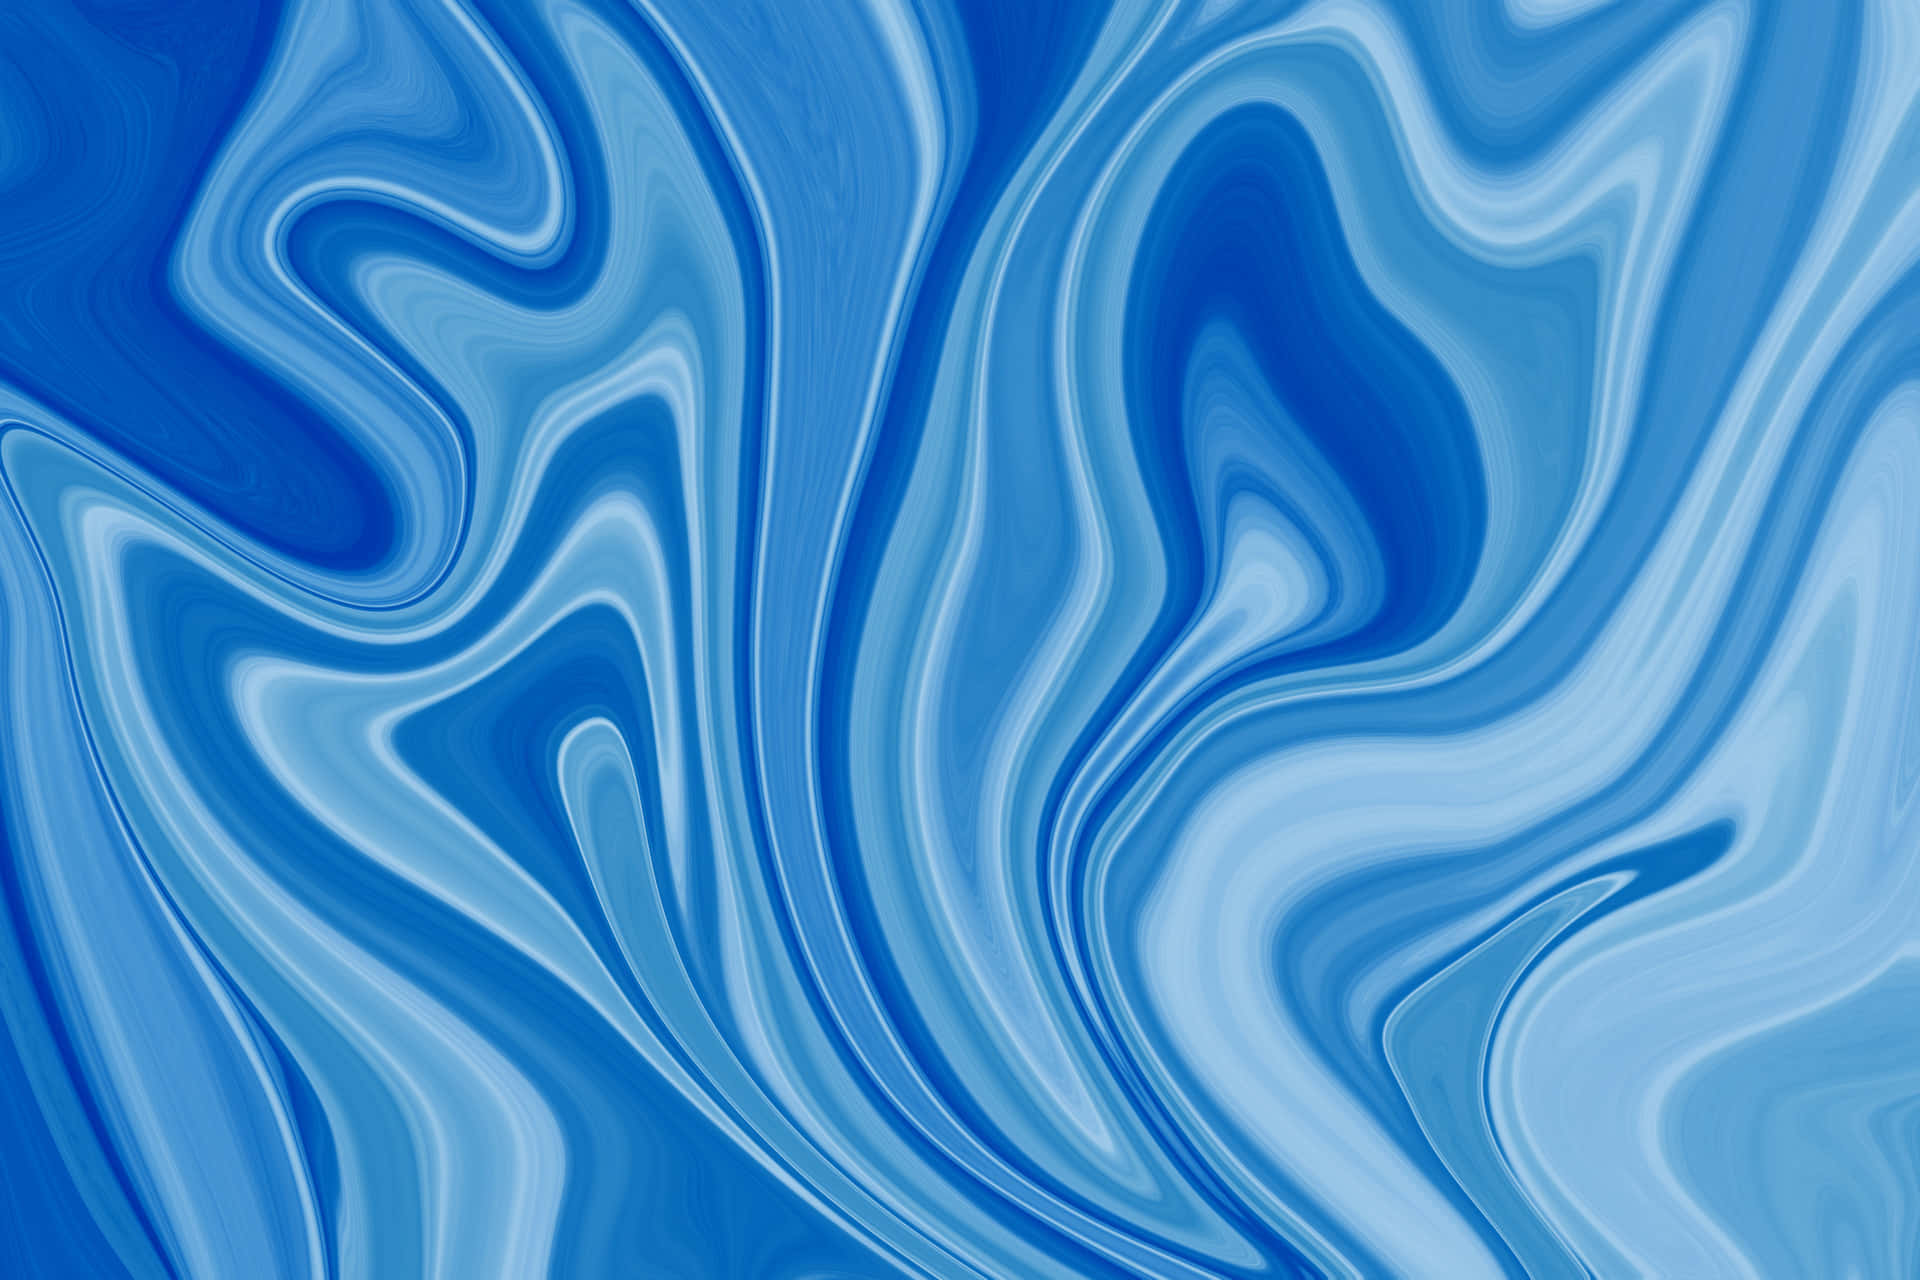 A Blue And White Swirly Background